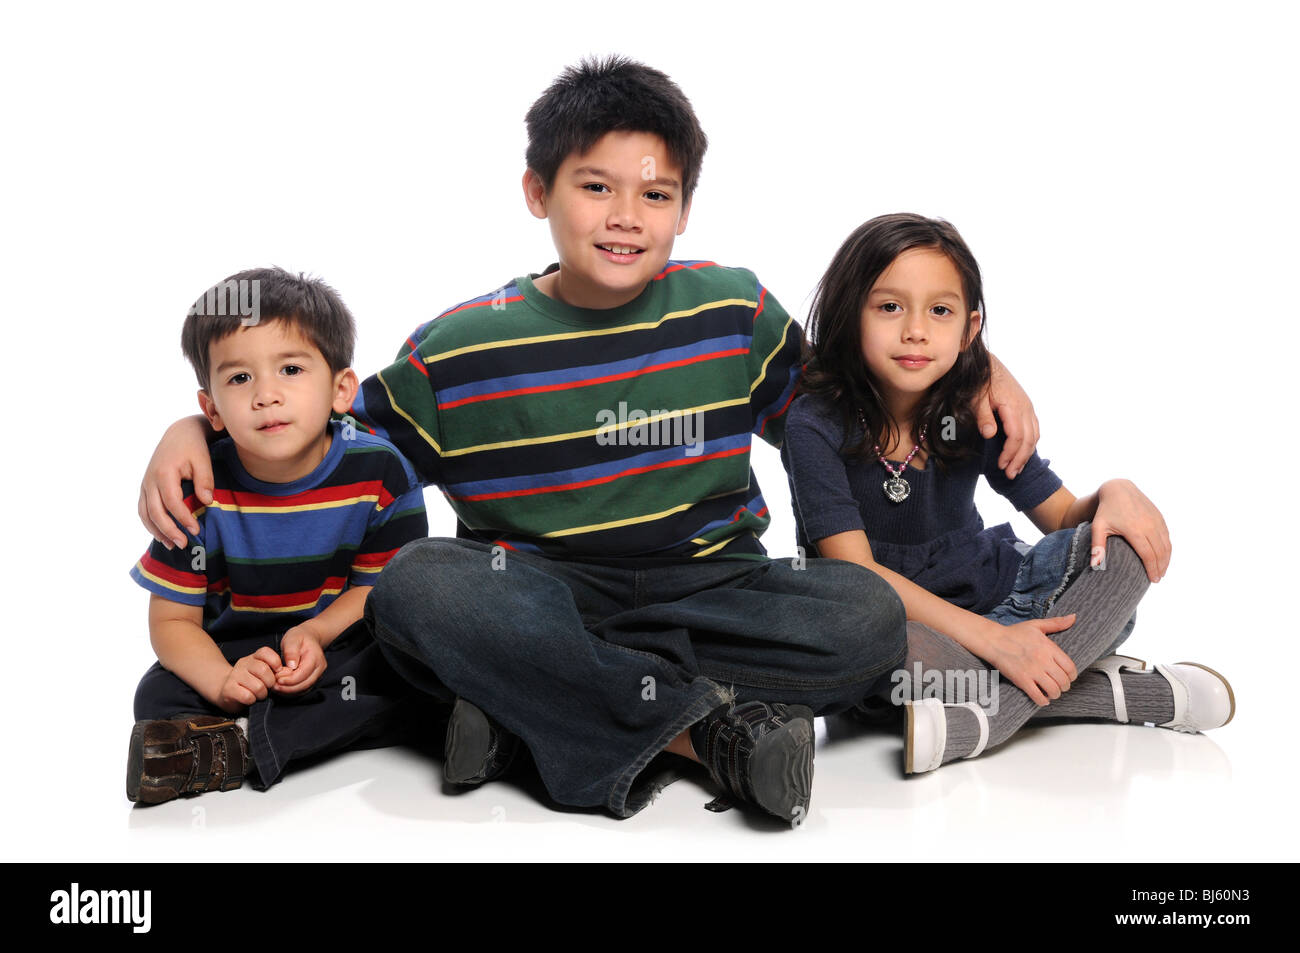 Three siblings sitting together over white background Stock Photo